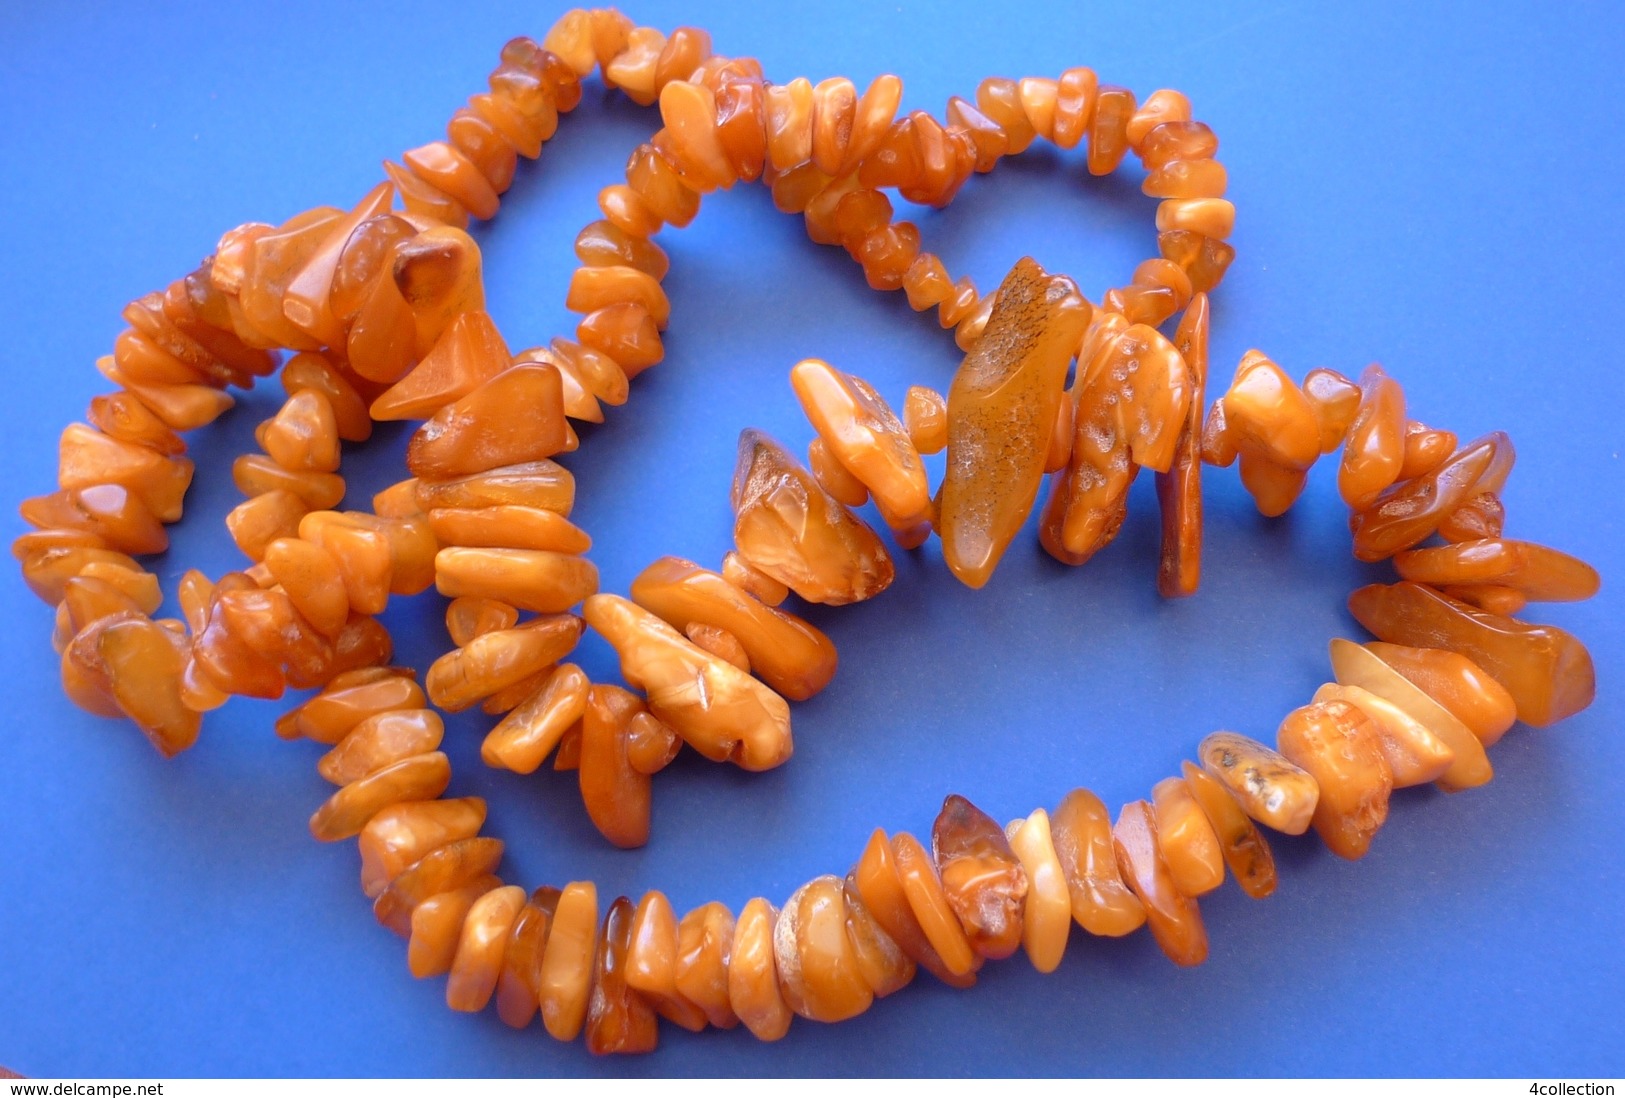 Old Natural Baltic Amber gem Multi-color Beads Necklace medicine jewelry 107g 535 Cts #47j